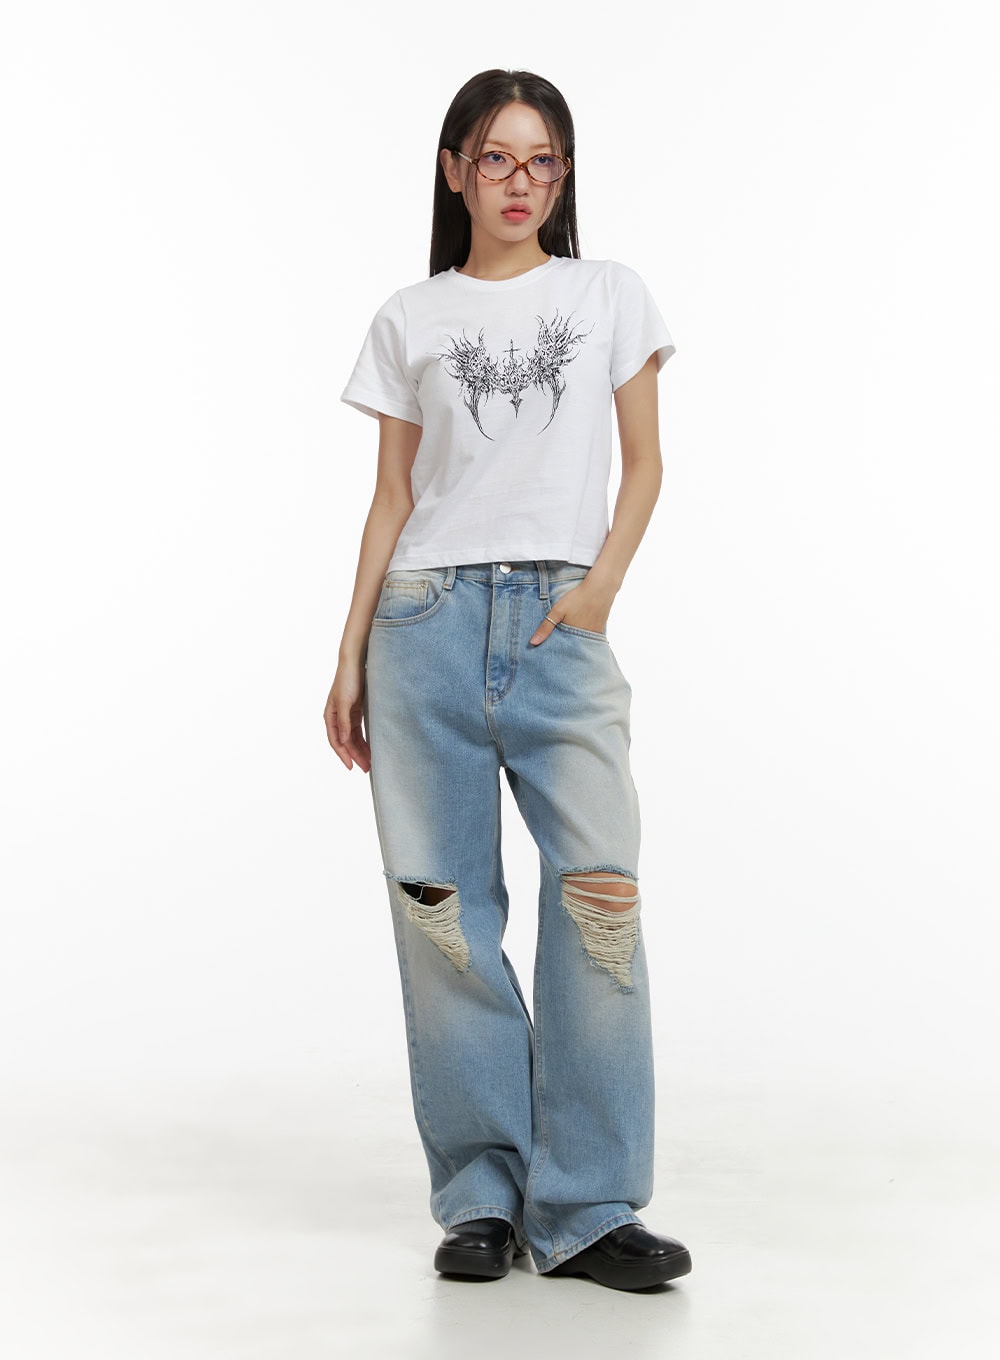 urban-washed-ripped-baggy-jeans-cu405